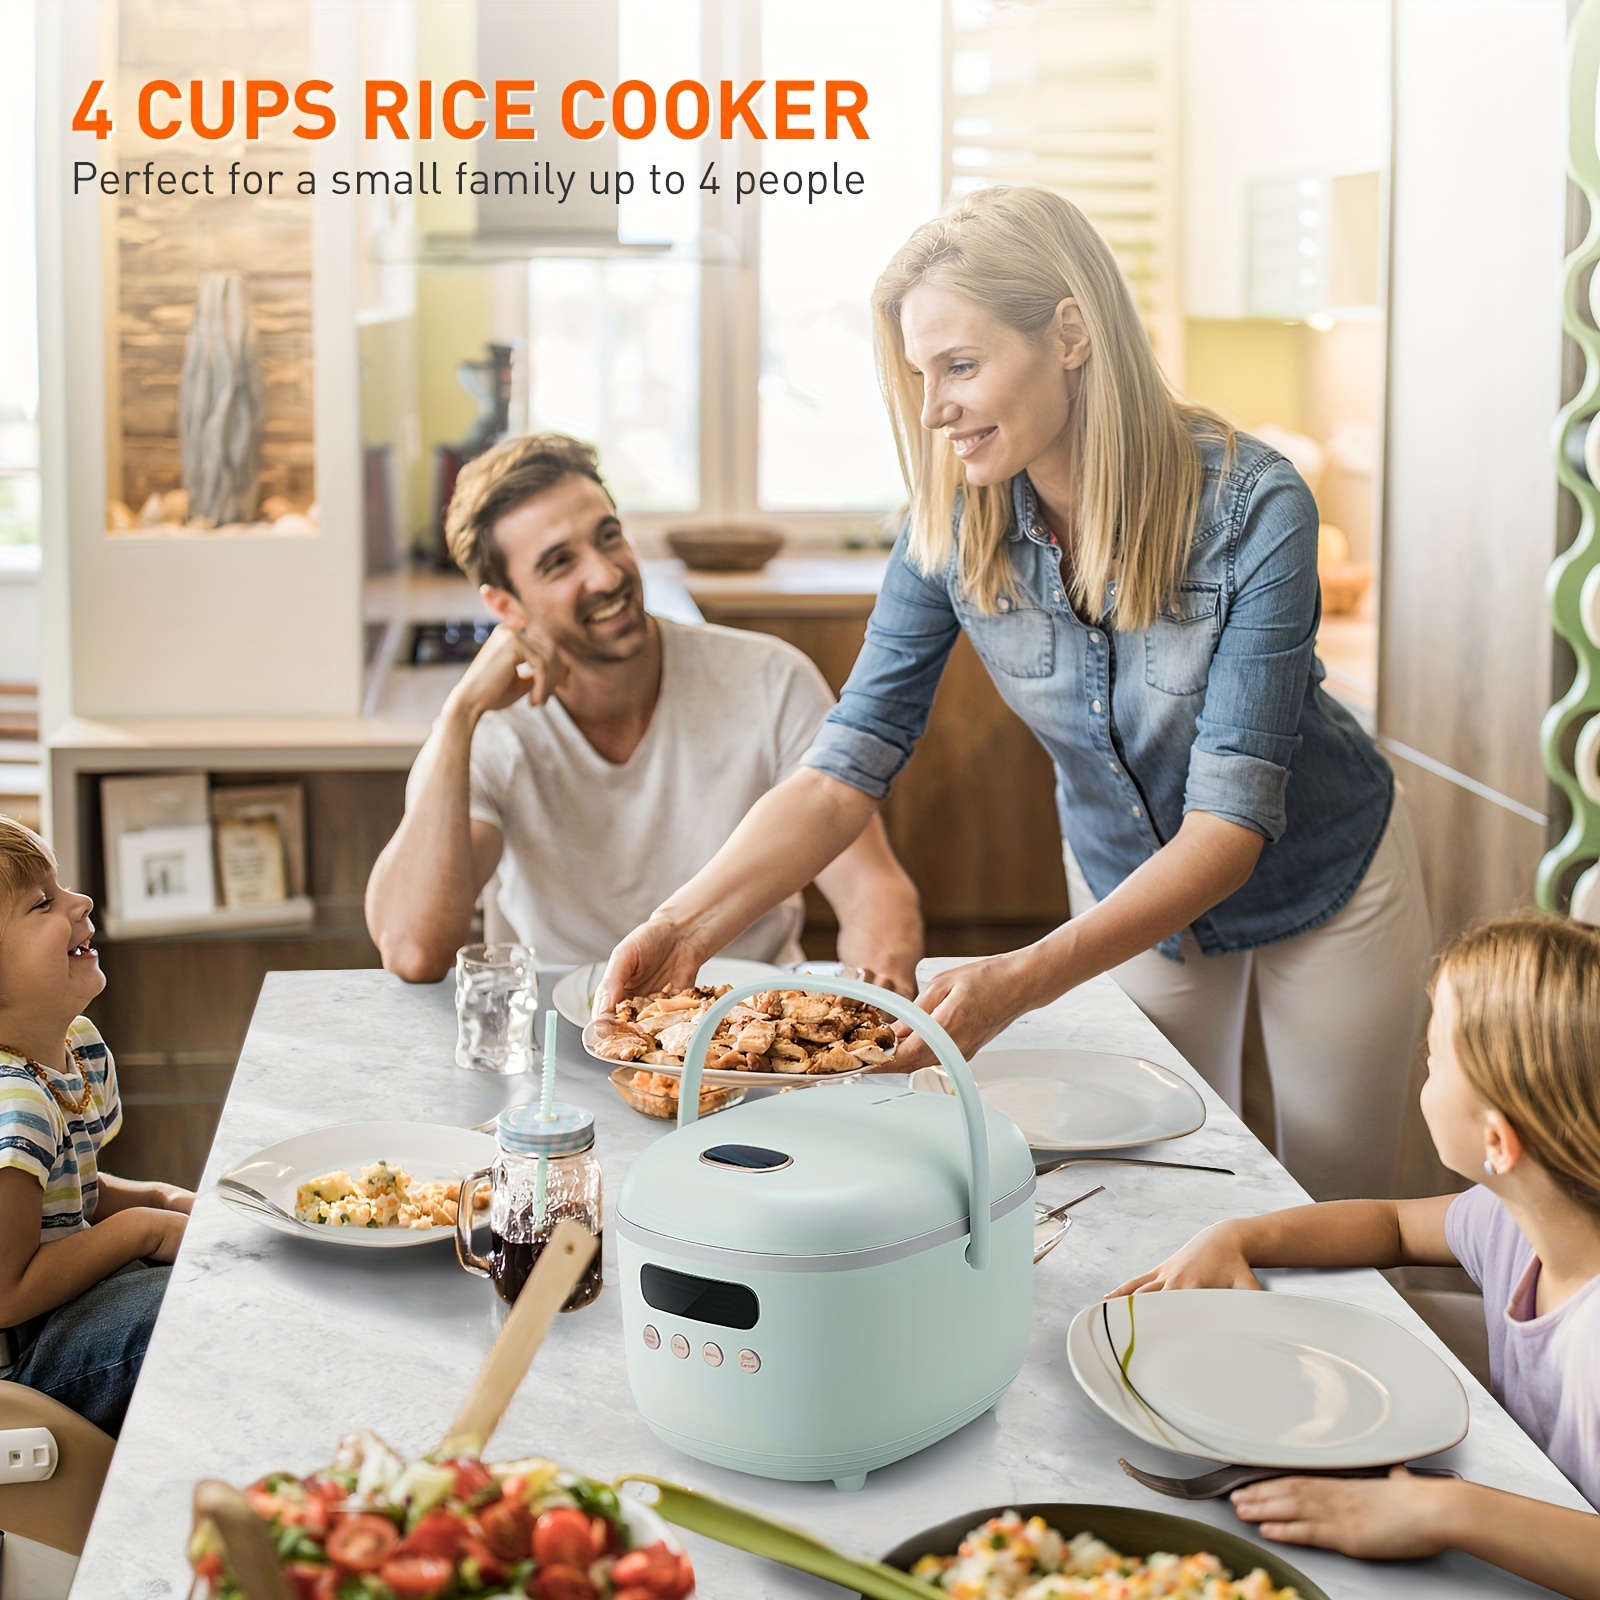 

Bear Rice Cooker 4 Cups (uncooked), Rice Cooker Small, 6 Cooking Functions, Advanced Technology, 24 Hours Preset Keep Warm, For White/brown Rice Oatmeal Soup Cake, 2l Green